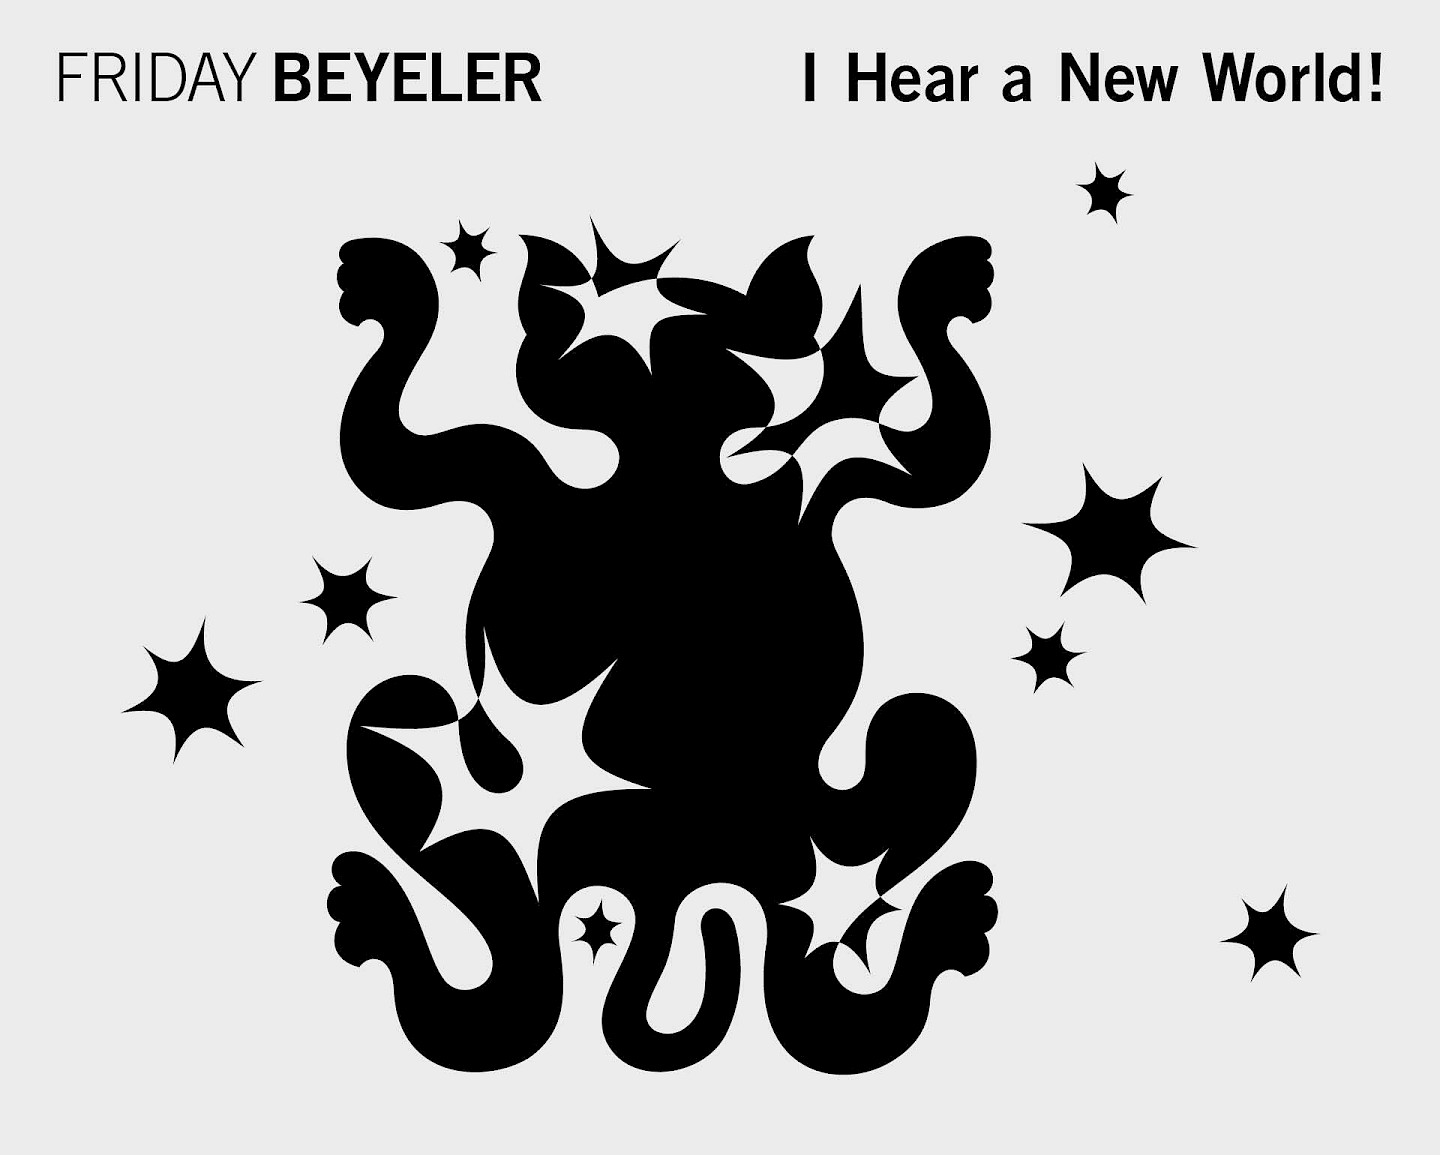 Friday Beyeler - Releasing All Your Powers